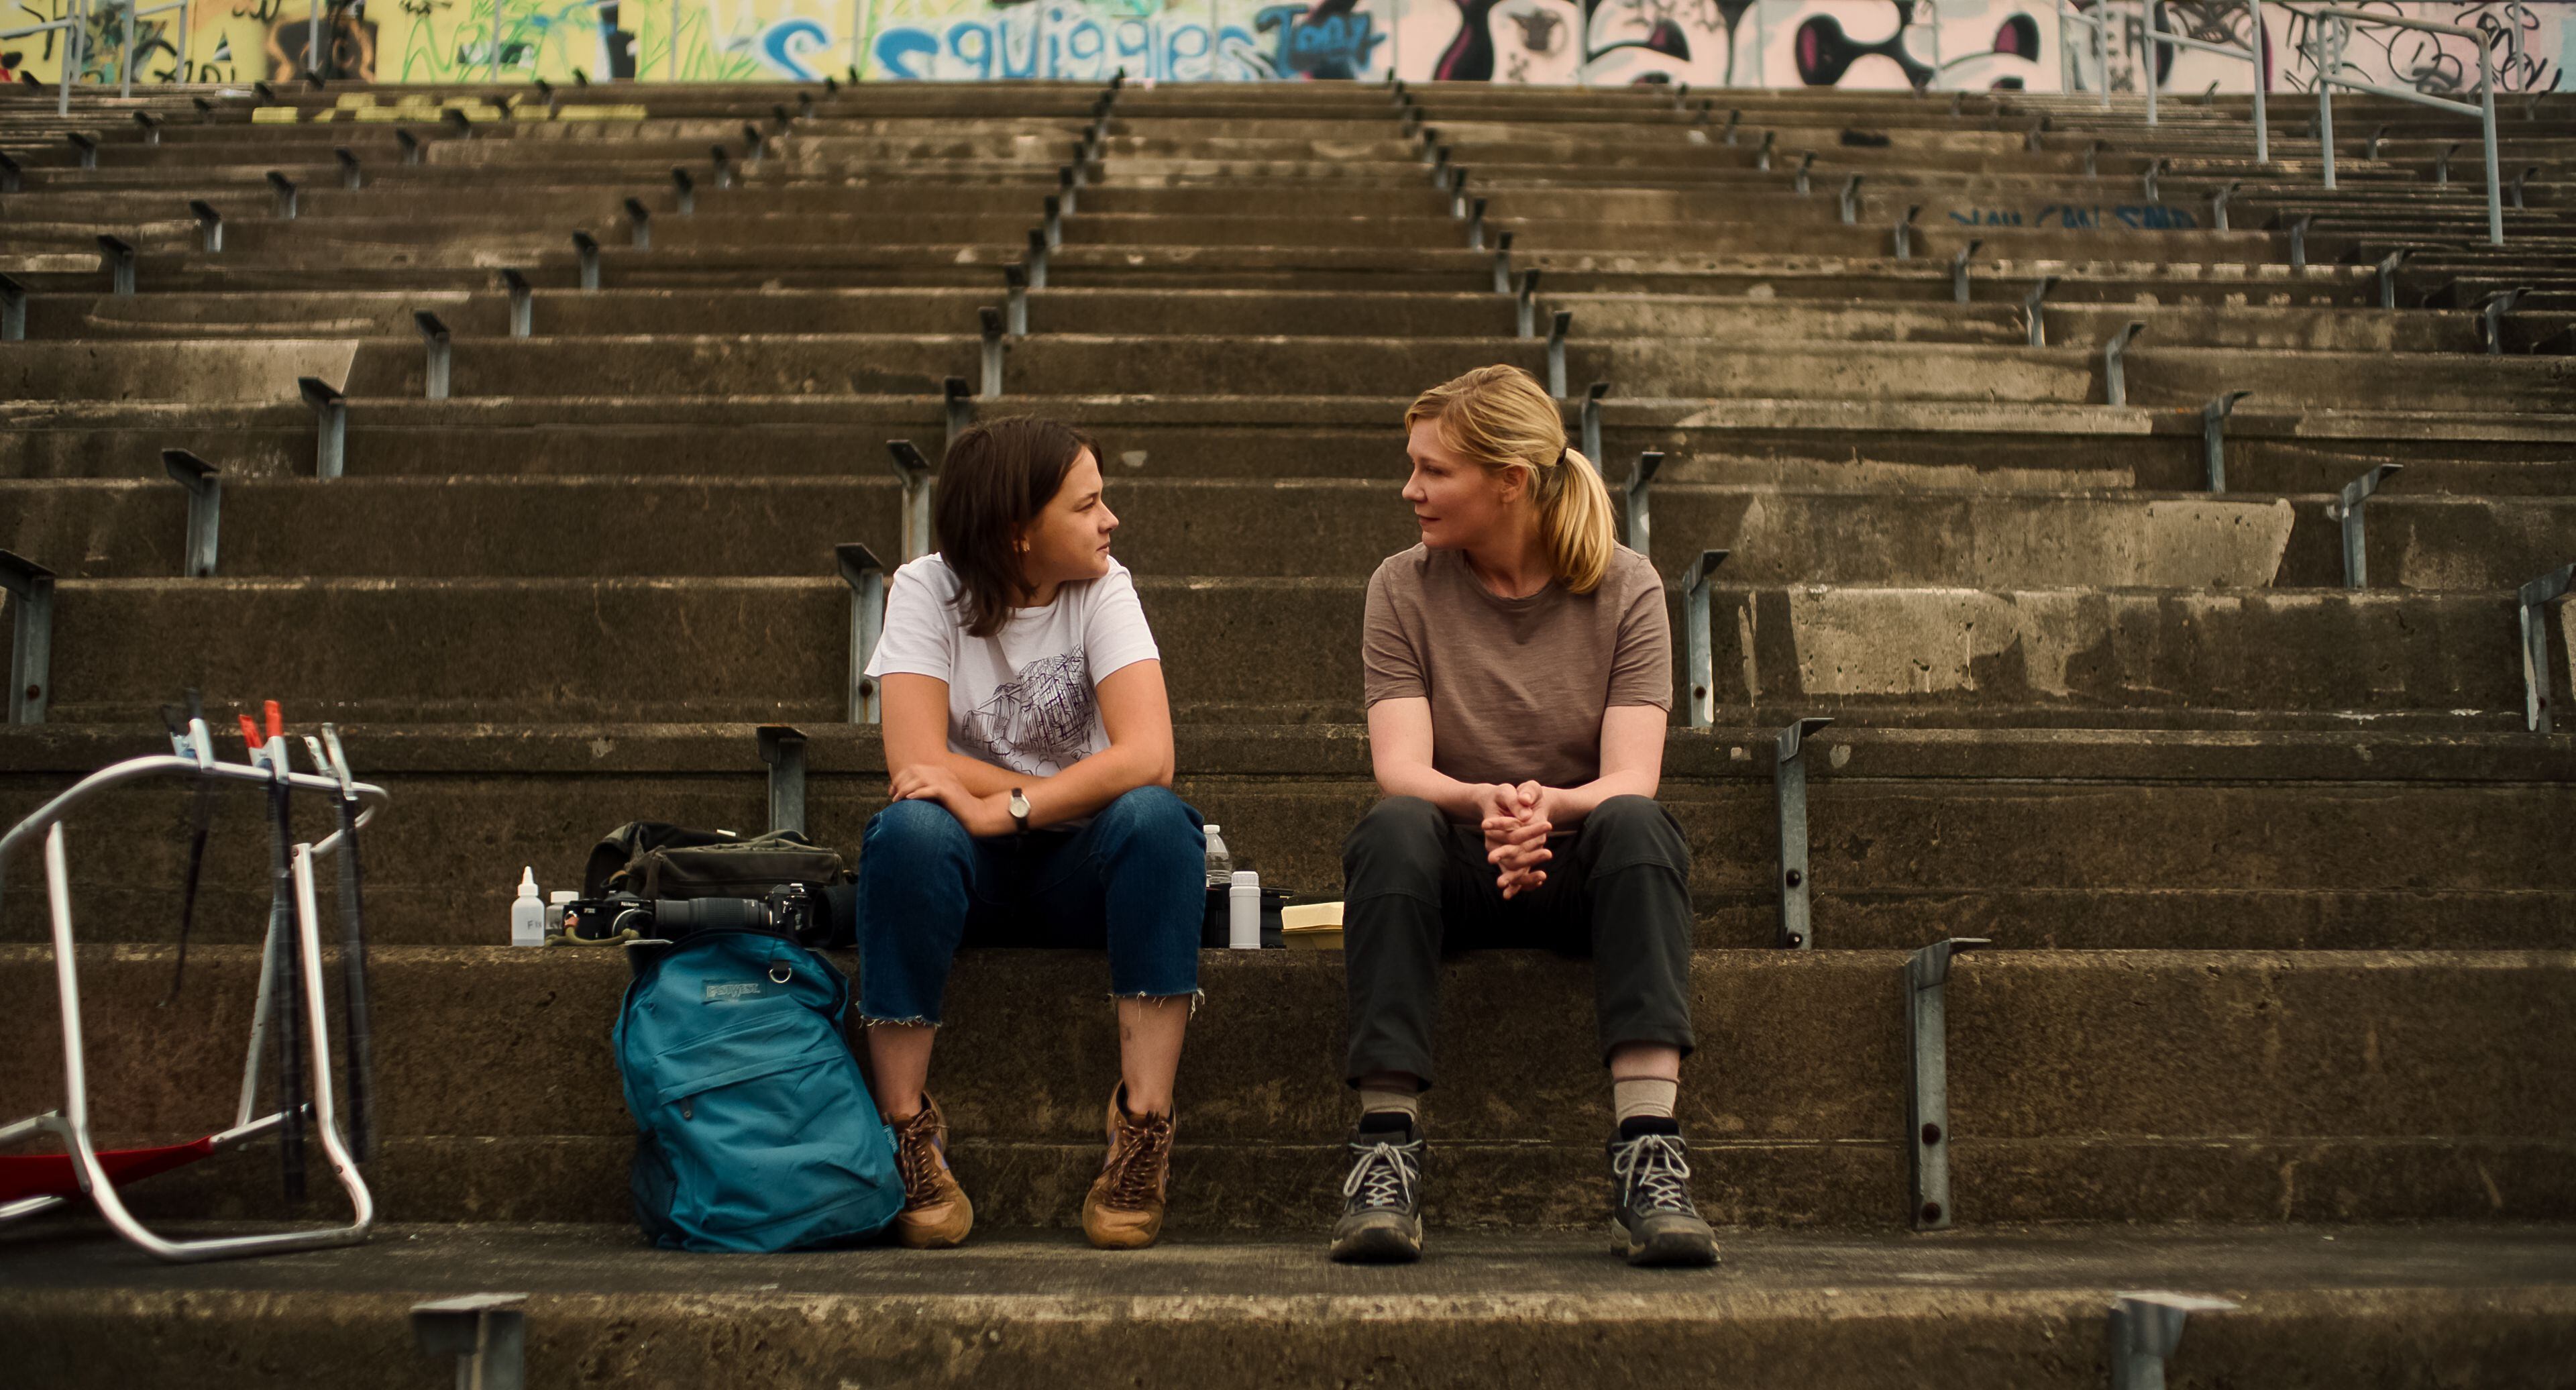 Cailee Spaeny and Kirsten Dunst (right) in an image from 'Civil War.'